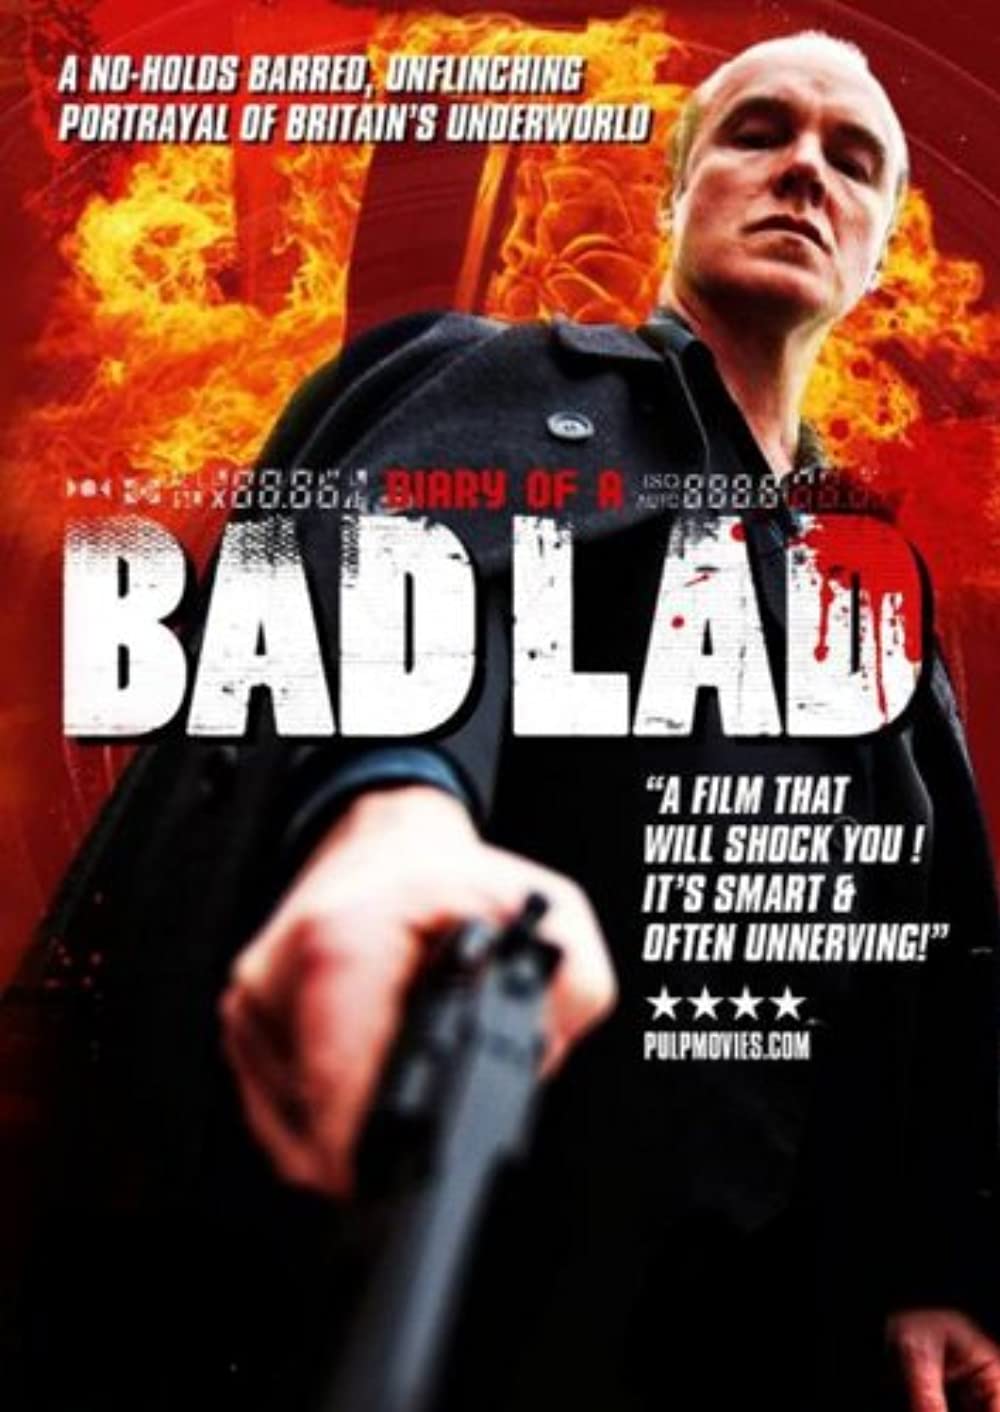 Diary of a Bad Lad Movie Download - Download Diary Of A Bad Lad Online